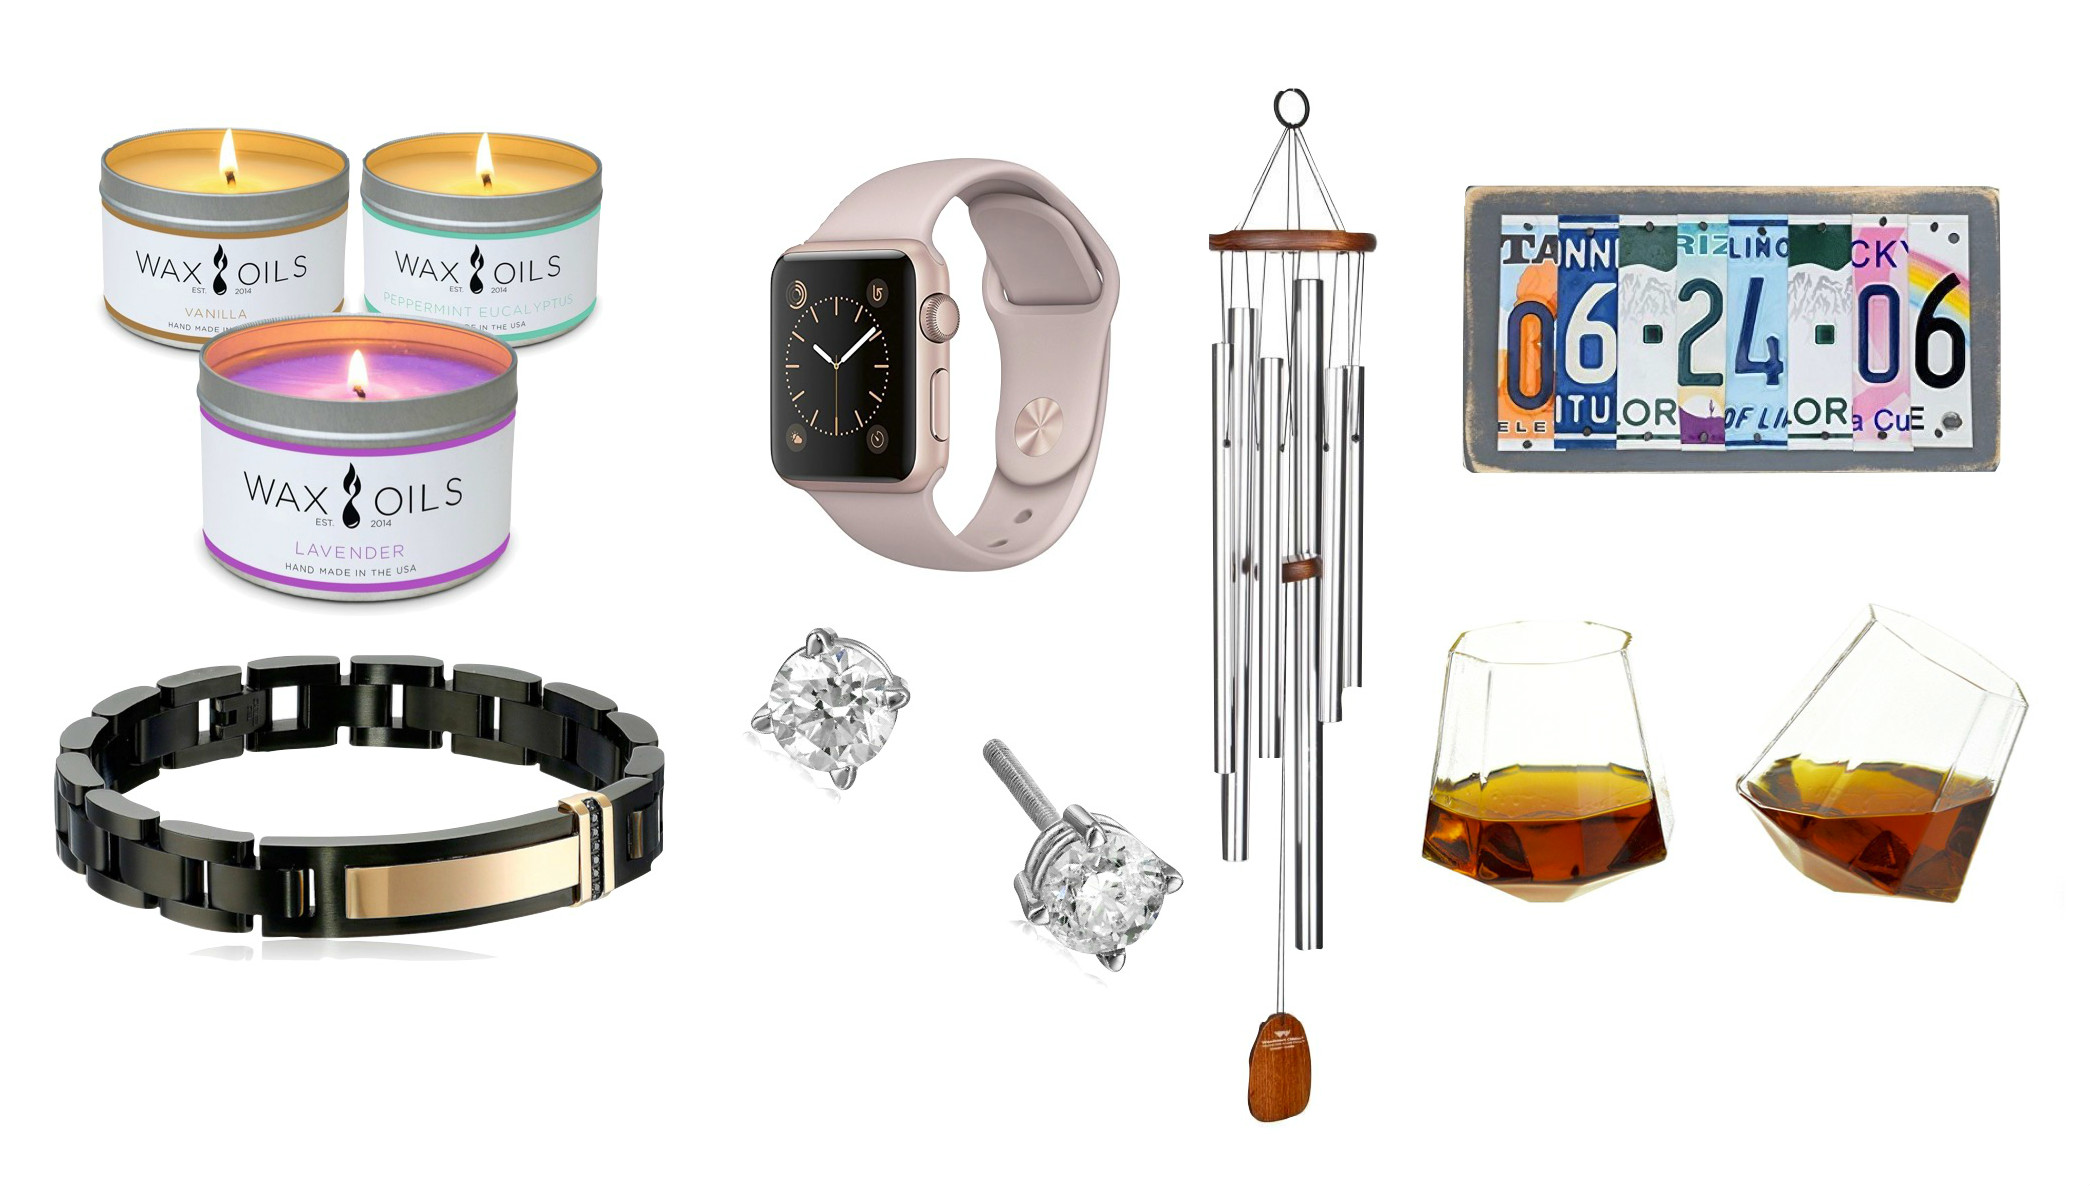 10th wedding anniversary gift ideas for wife